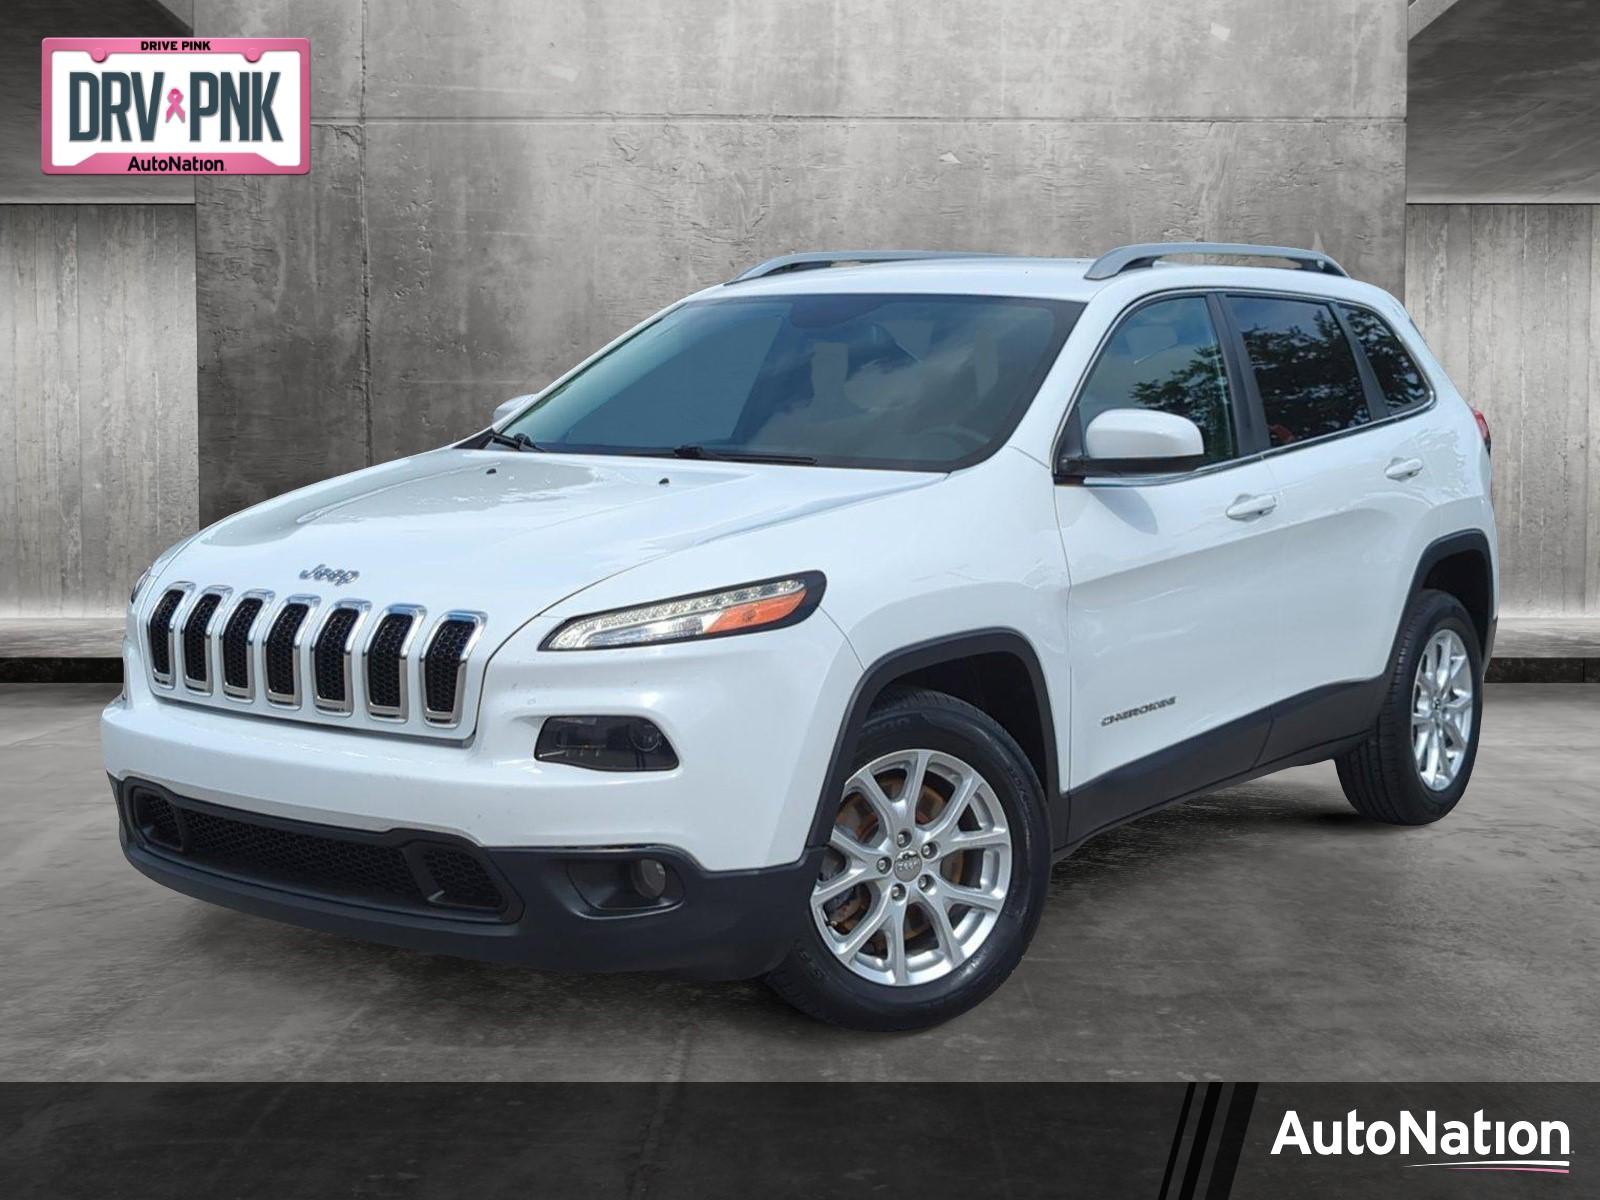 2016 Jeep Cherokee Vehicle Photo in Hollywood, FL 33021